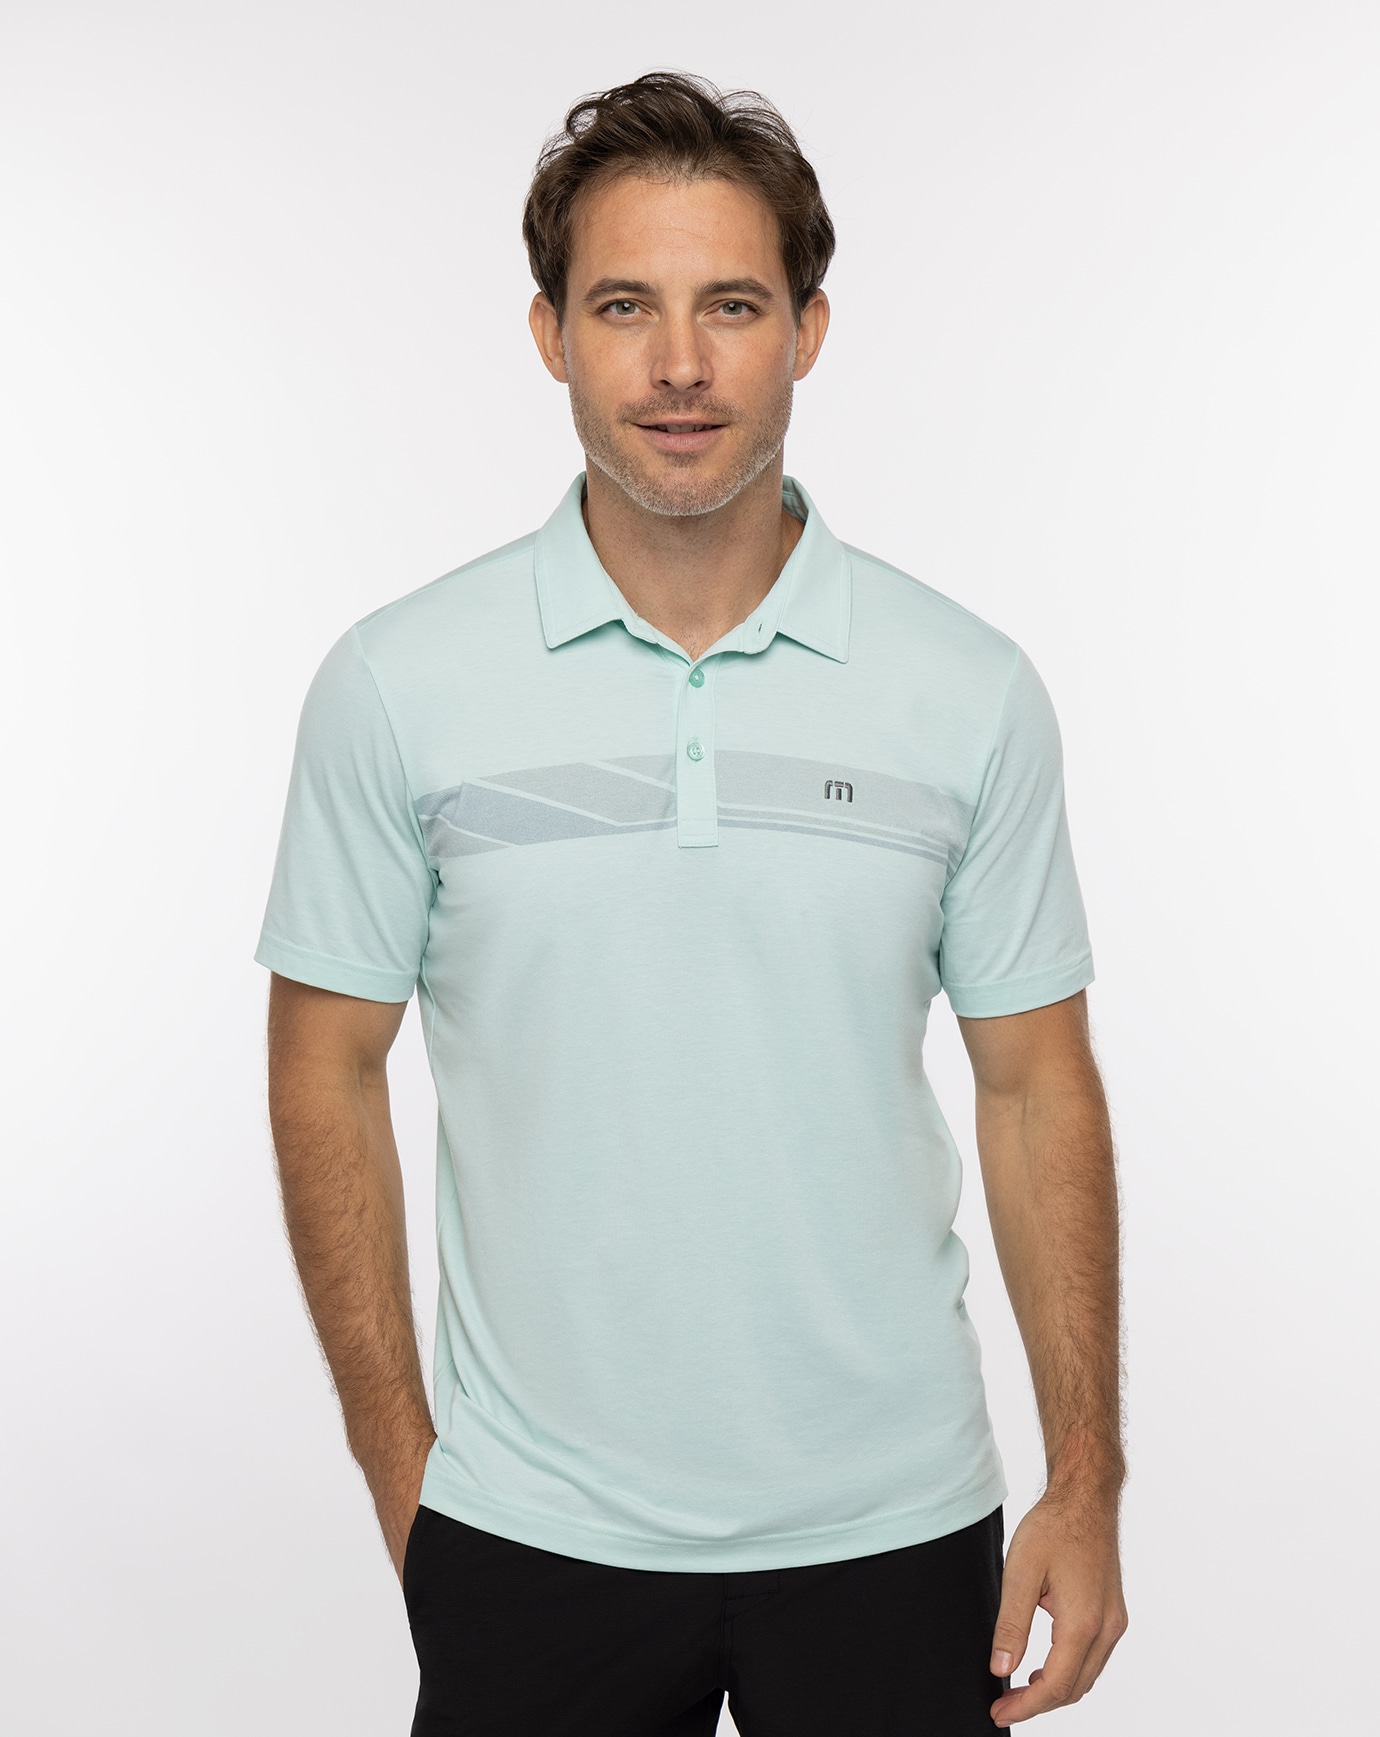 Related Product - MATTER OF OPINION POLO